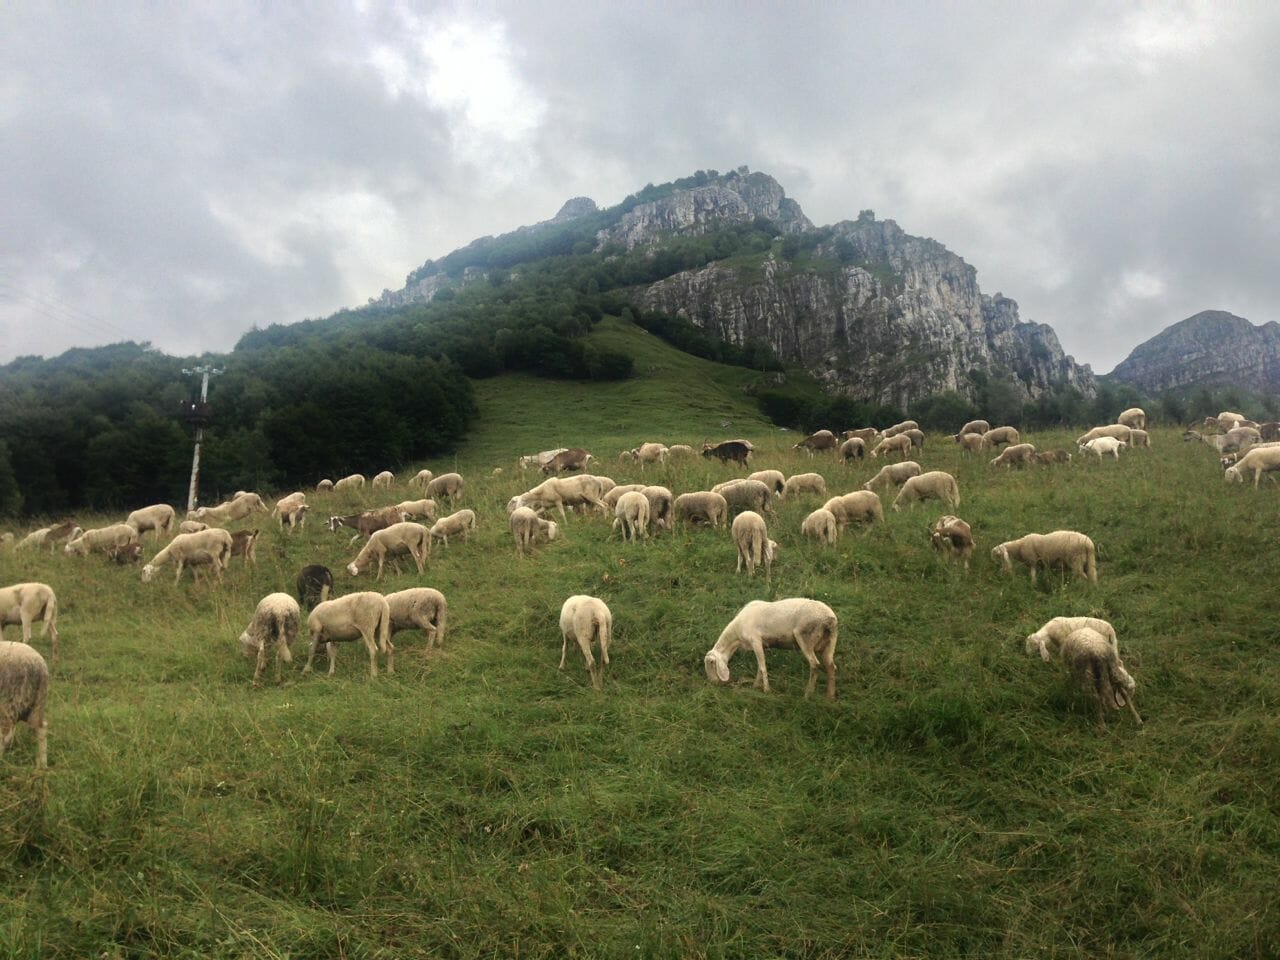 A large herd of goats on the backside of Piani D'Erna.